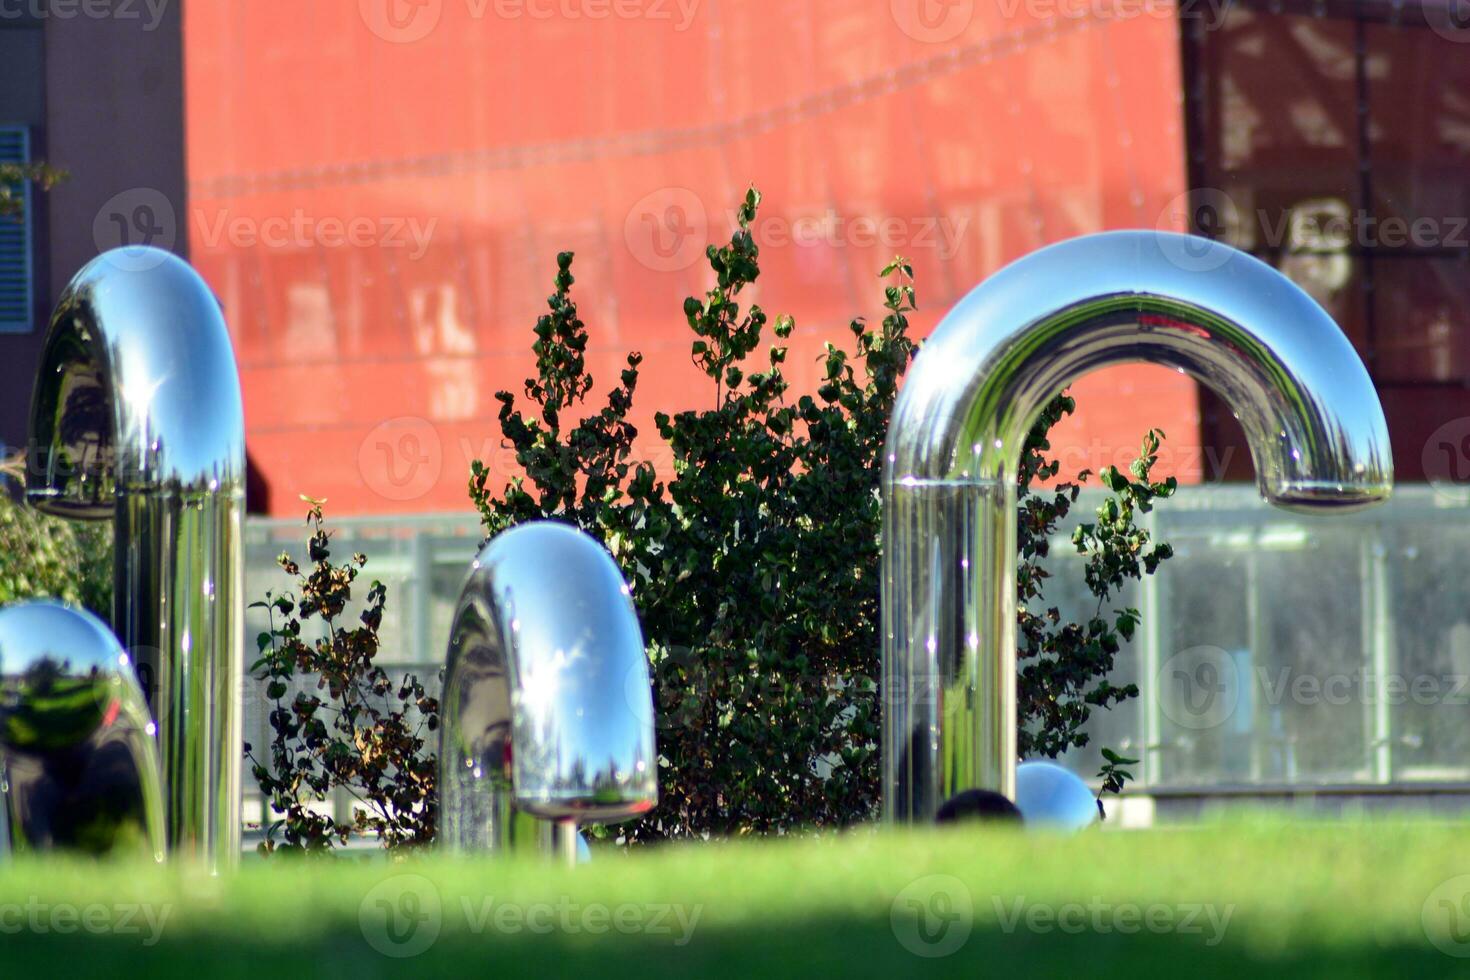 Public art installation in front modern building.Decorative stainless steel pipes photo